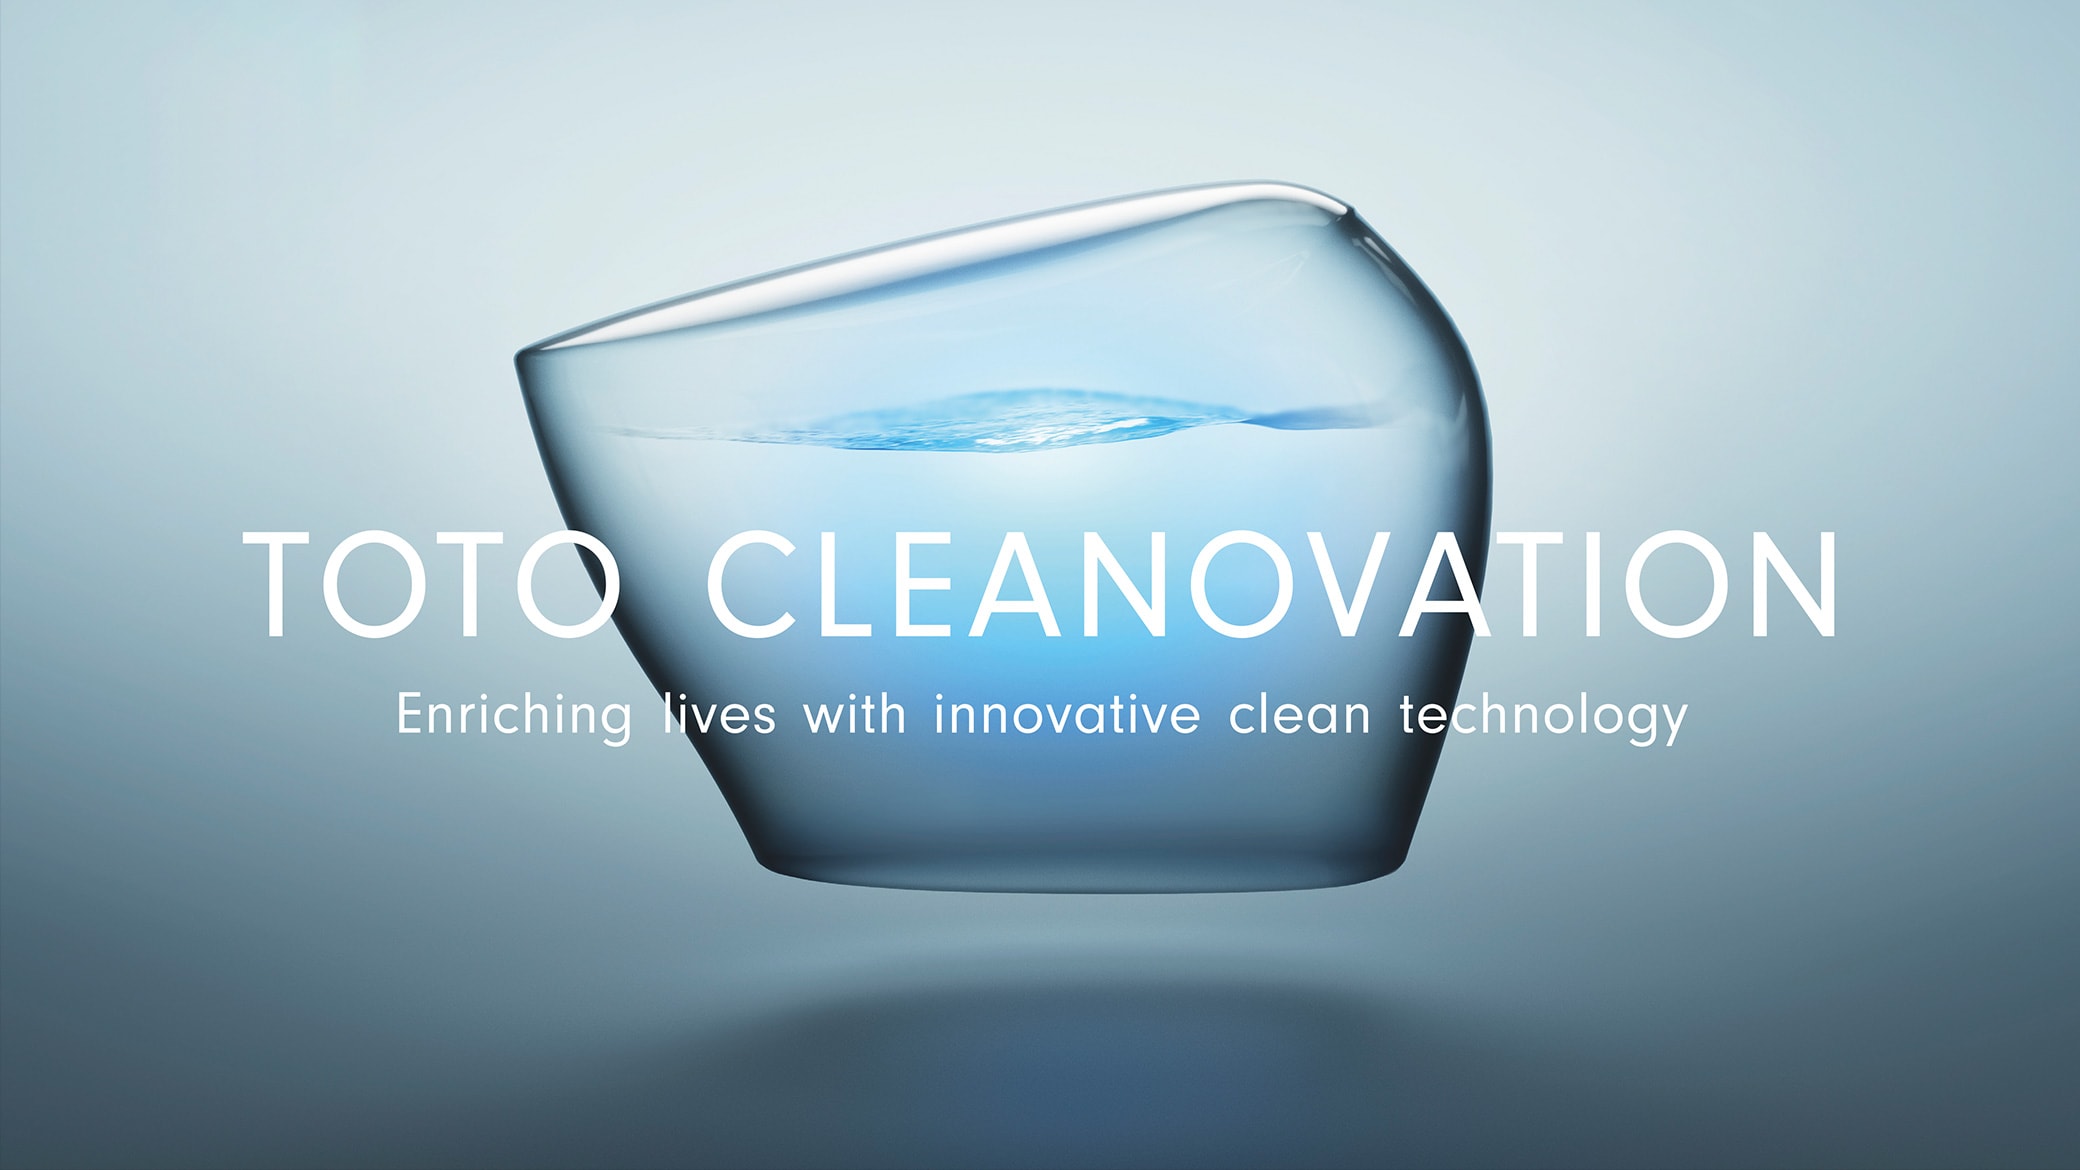 TOTO CLEANOVATION  Enriching lives with innovative cleantechnology